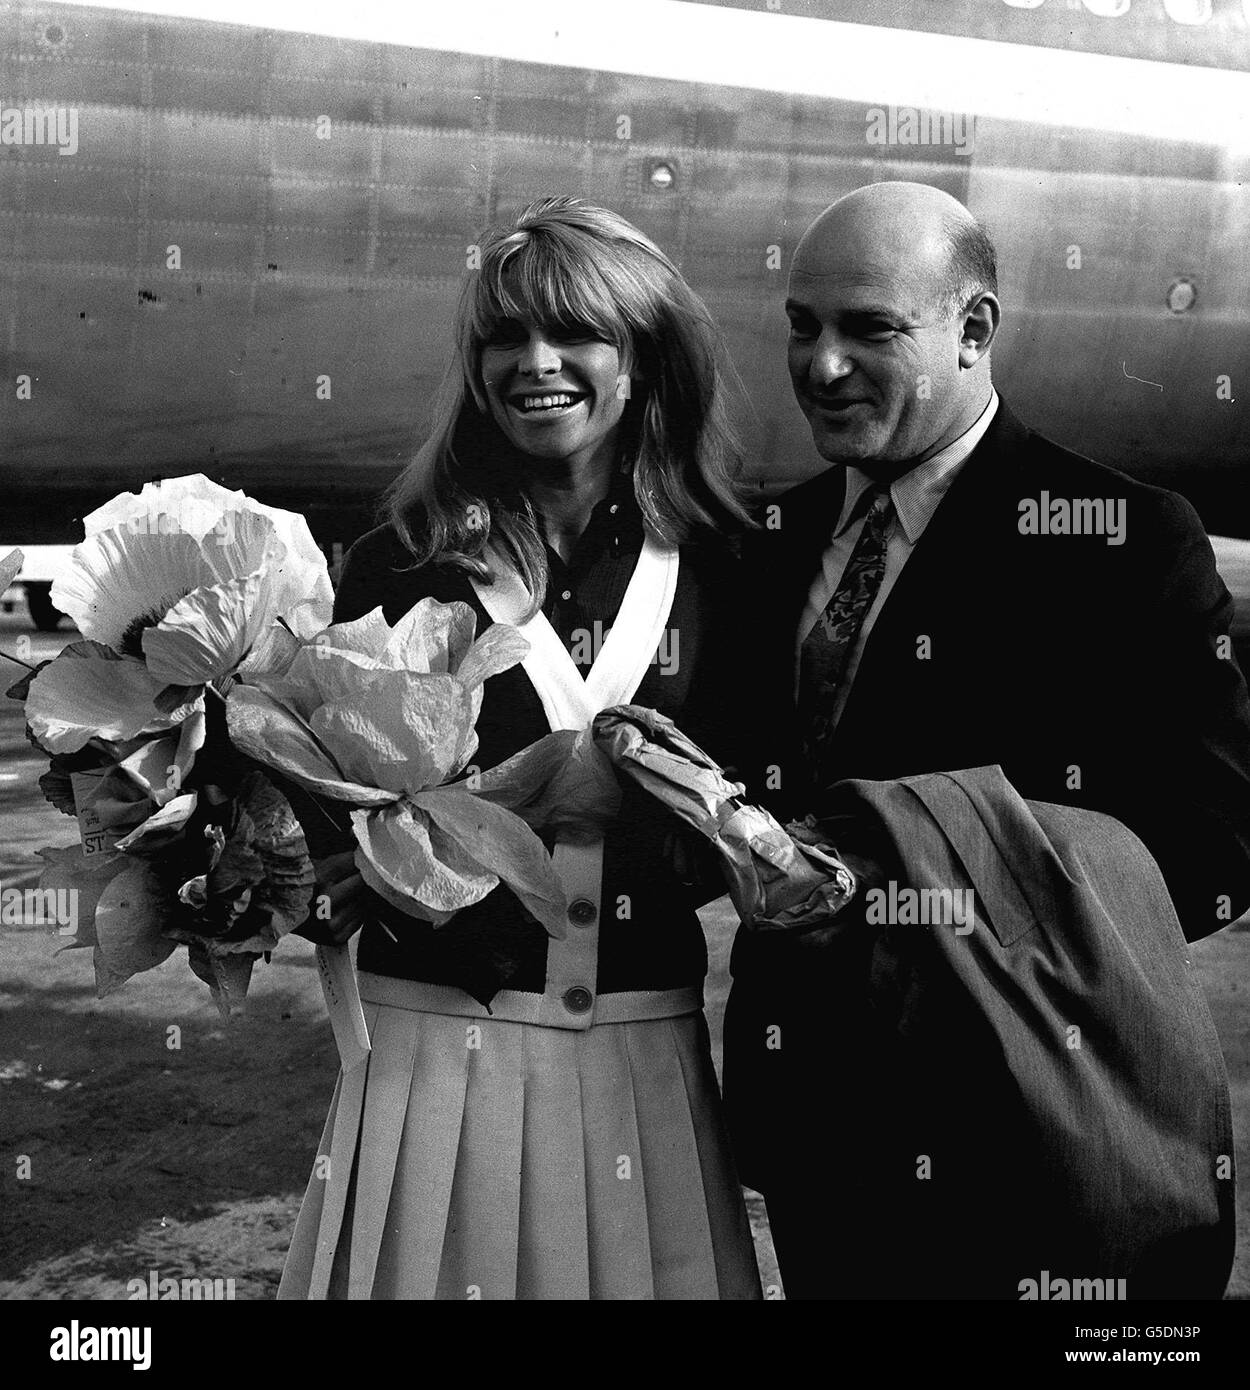 Actress Julie Christie and Film Director John Schlesinger at London Airport. CELEBRITY Stock Photo